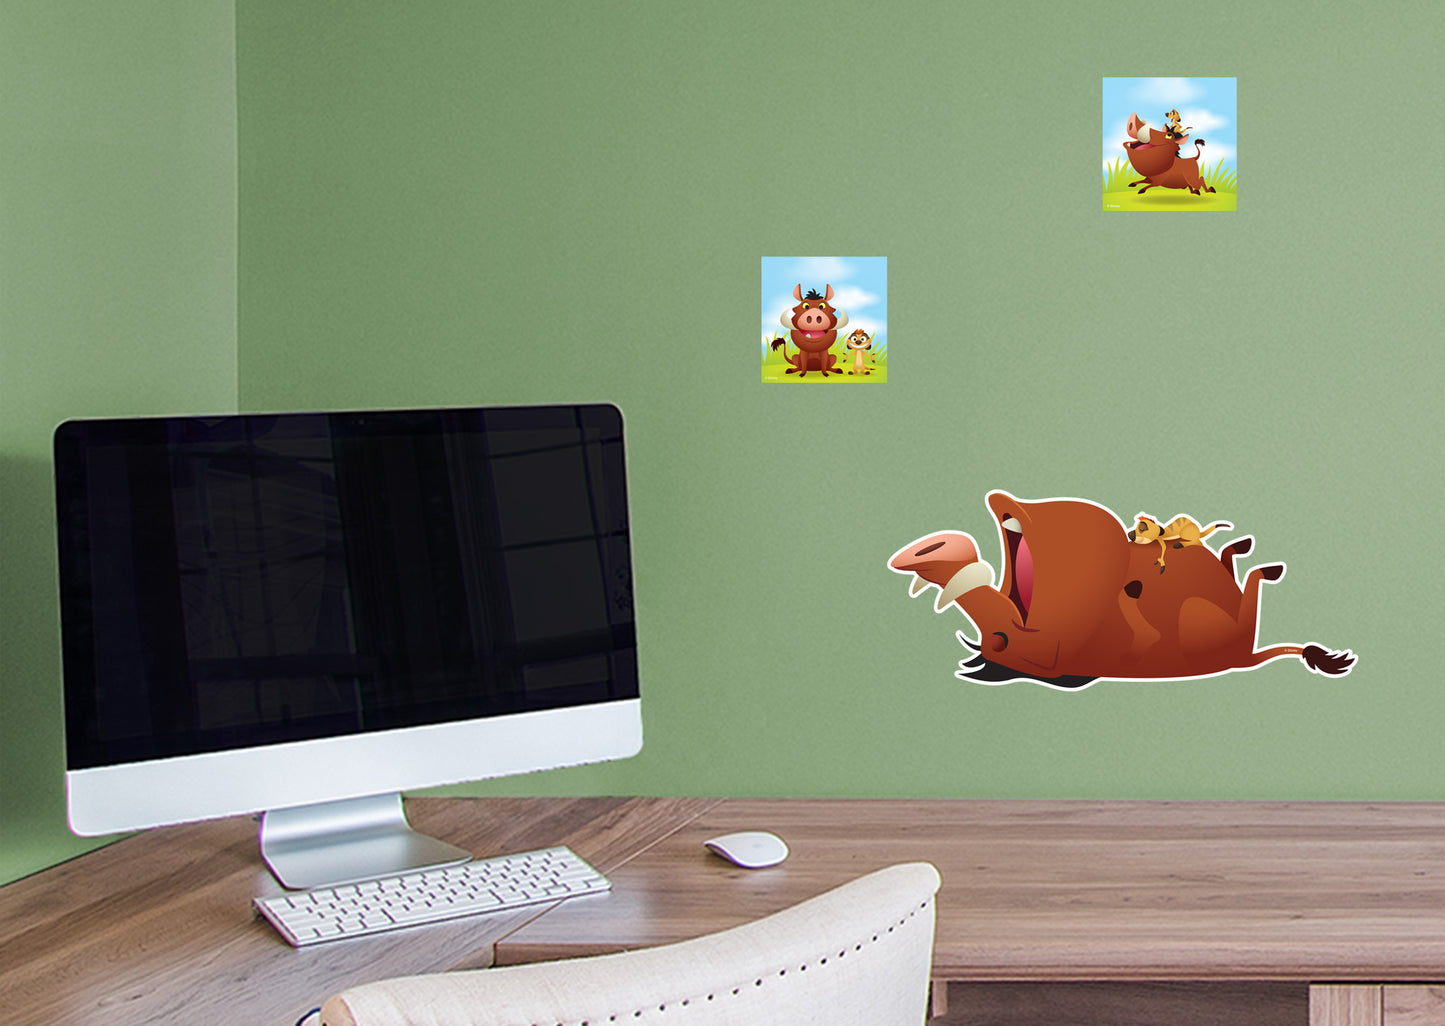 The Lion King: Timon and Pumba Kids  Nap Time        - Officially Licensed Disney Removable Wall   Adhesive Decal